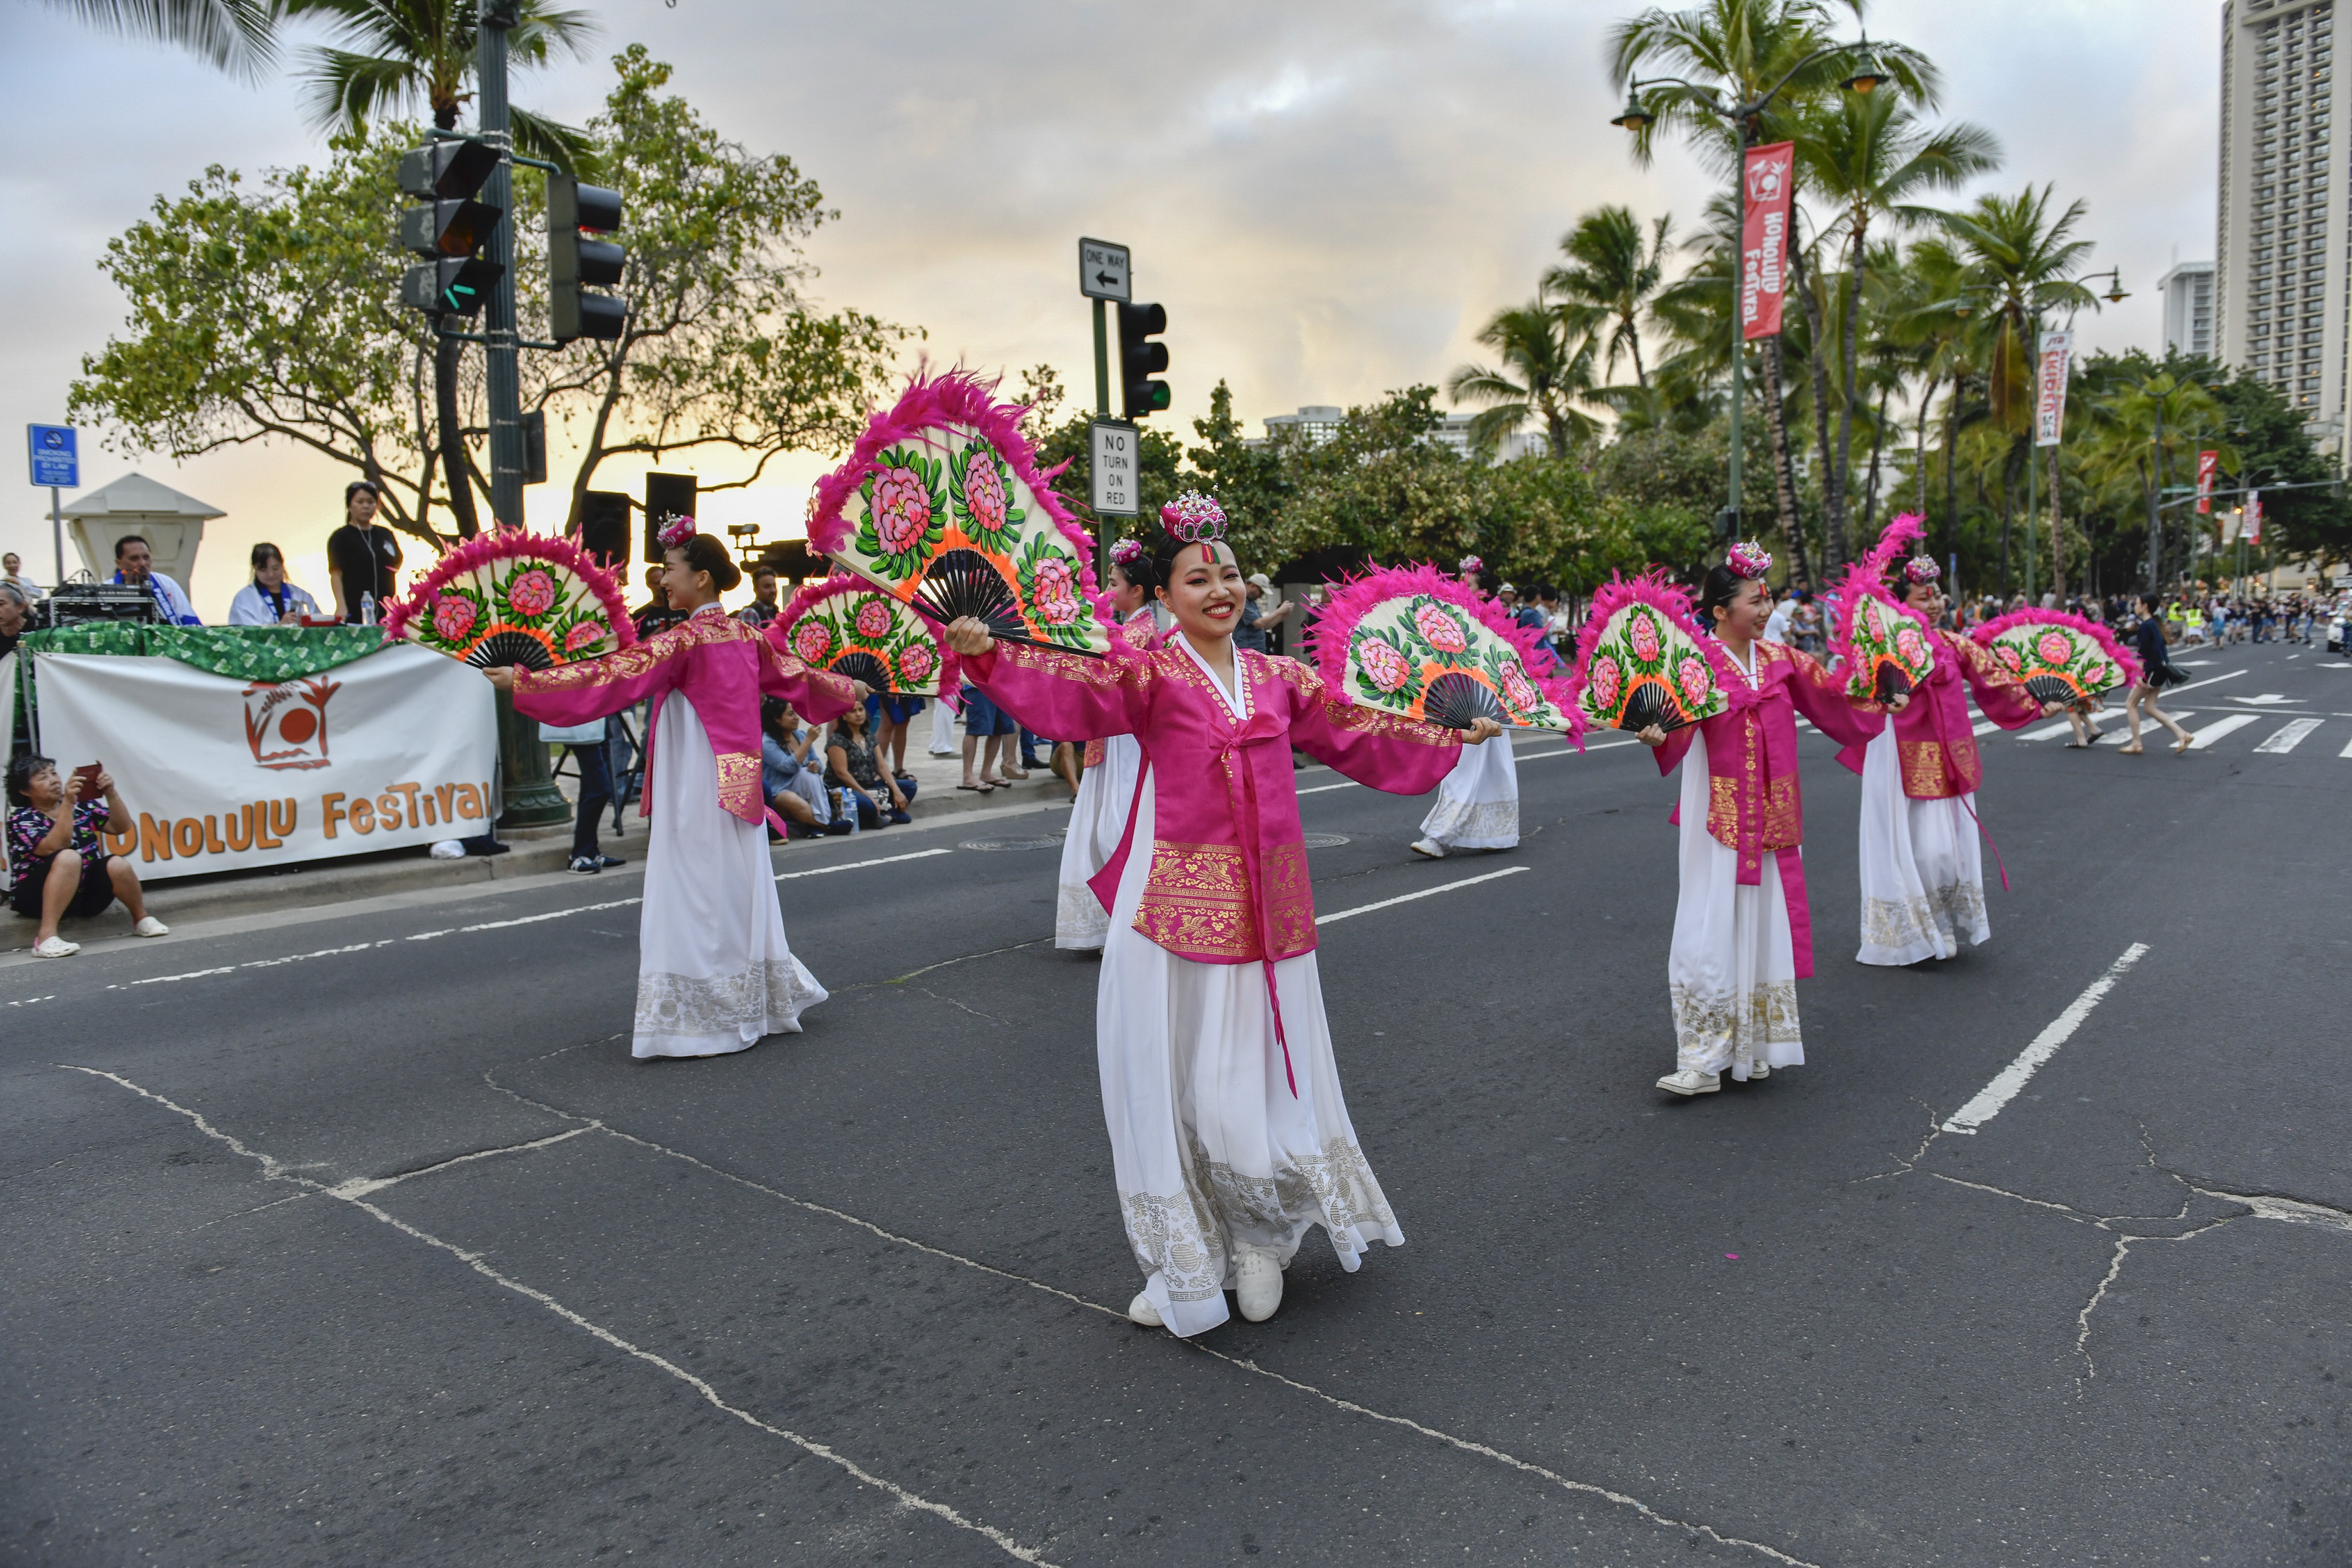 Honolulu Festival to Celebrate Diversity of Asia-Pacific Cultures